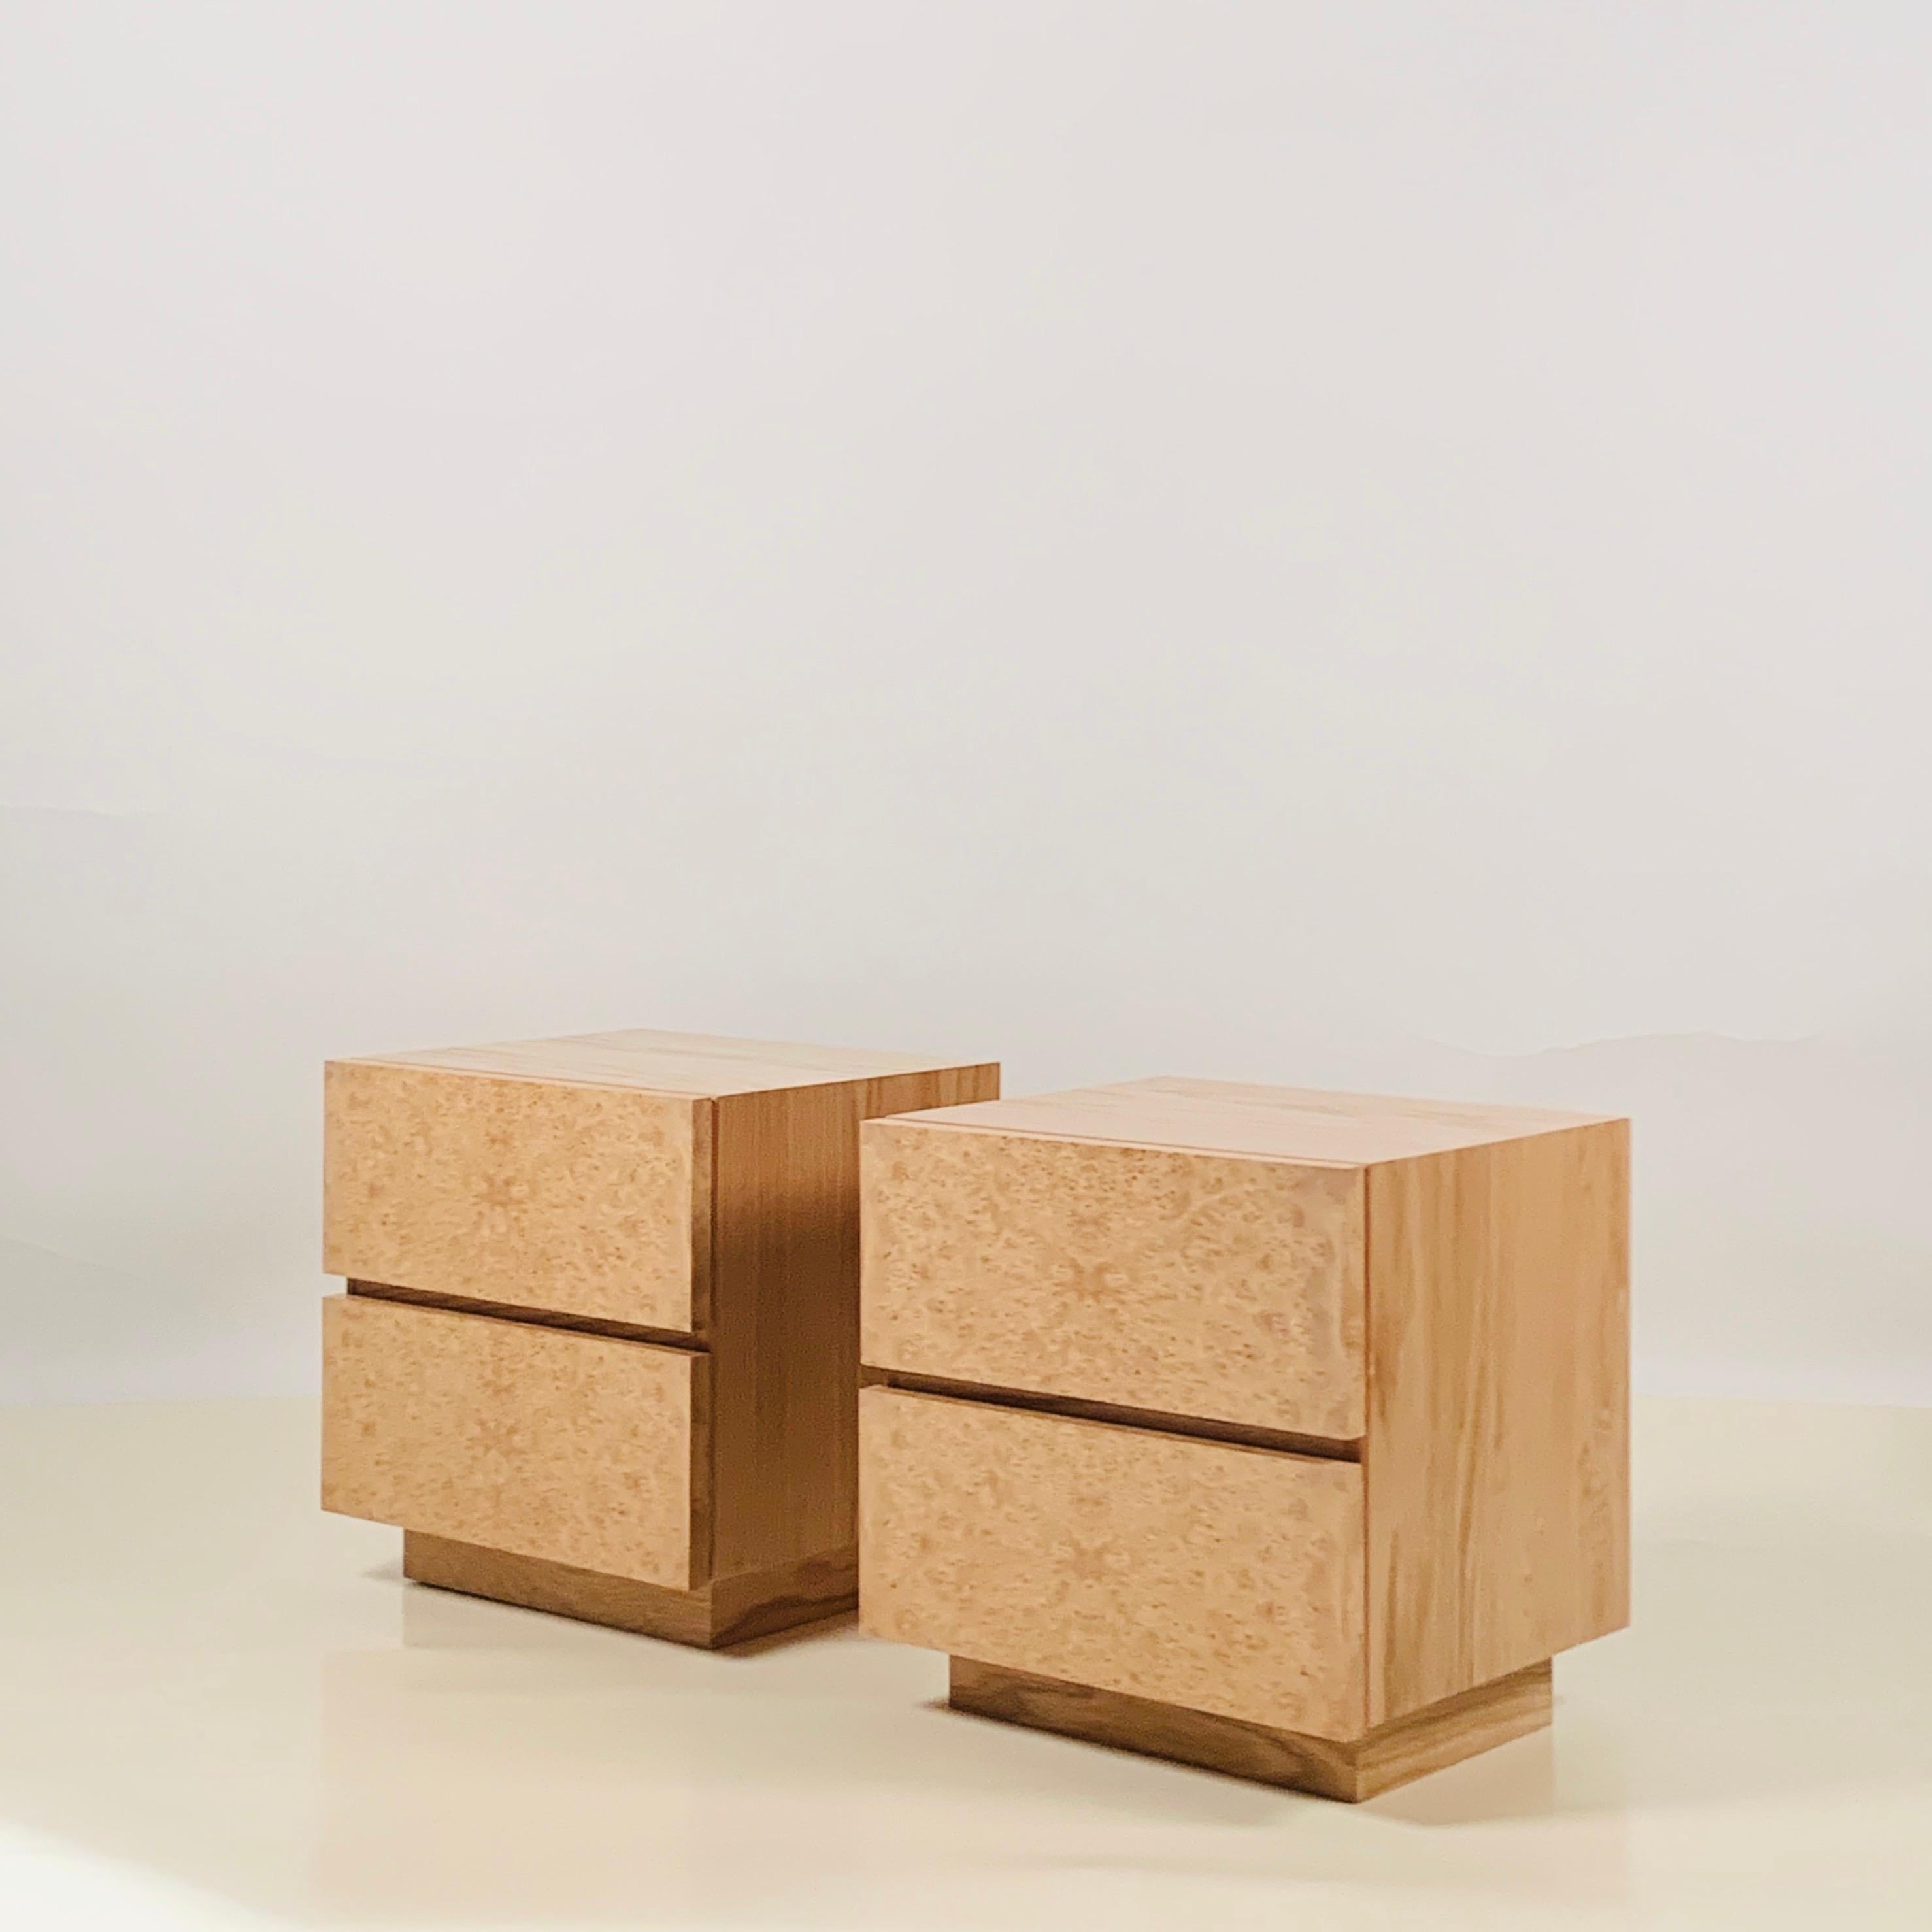 Pair of Minimalist 'Amboine' burl wood nightstands by Design Frères.

Simple, functional design with 2 deep drawers per nightstand.

The bedroom picture is of a similar sized pair.